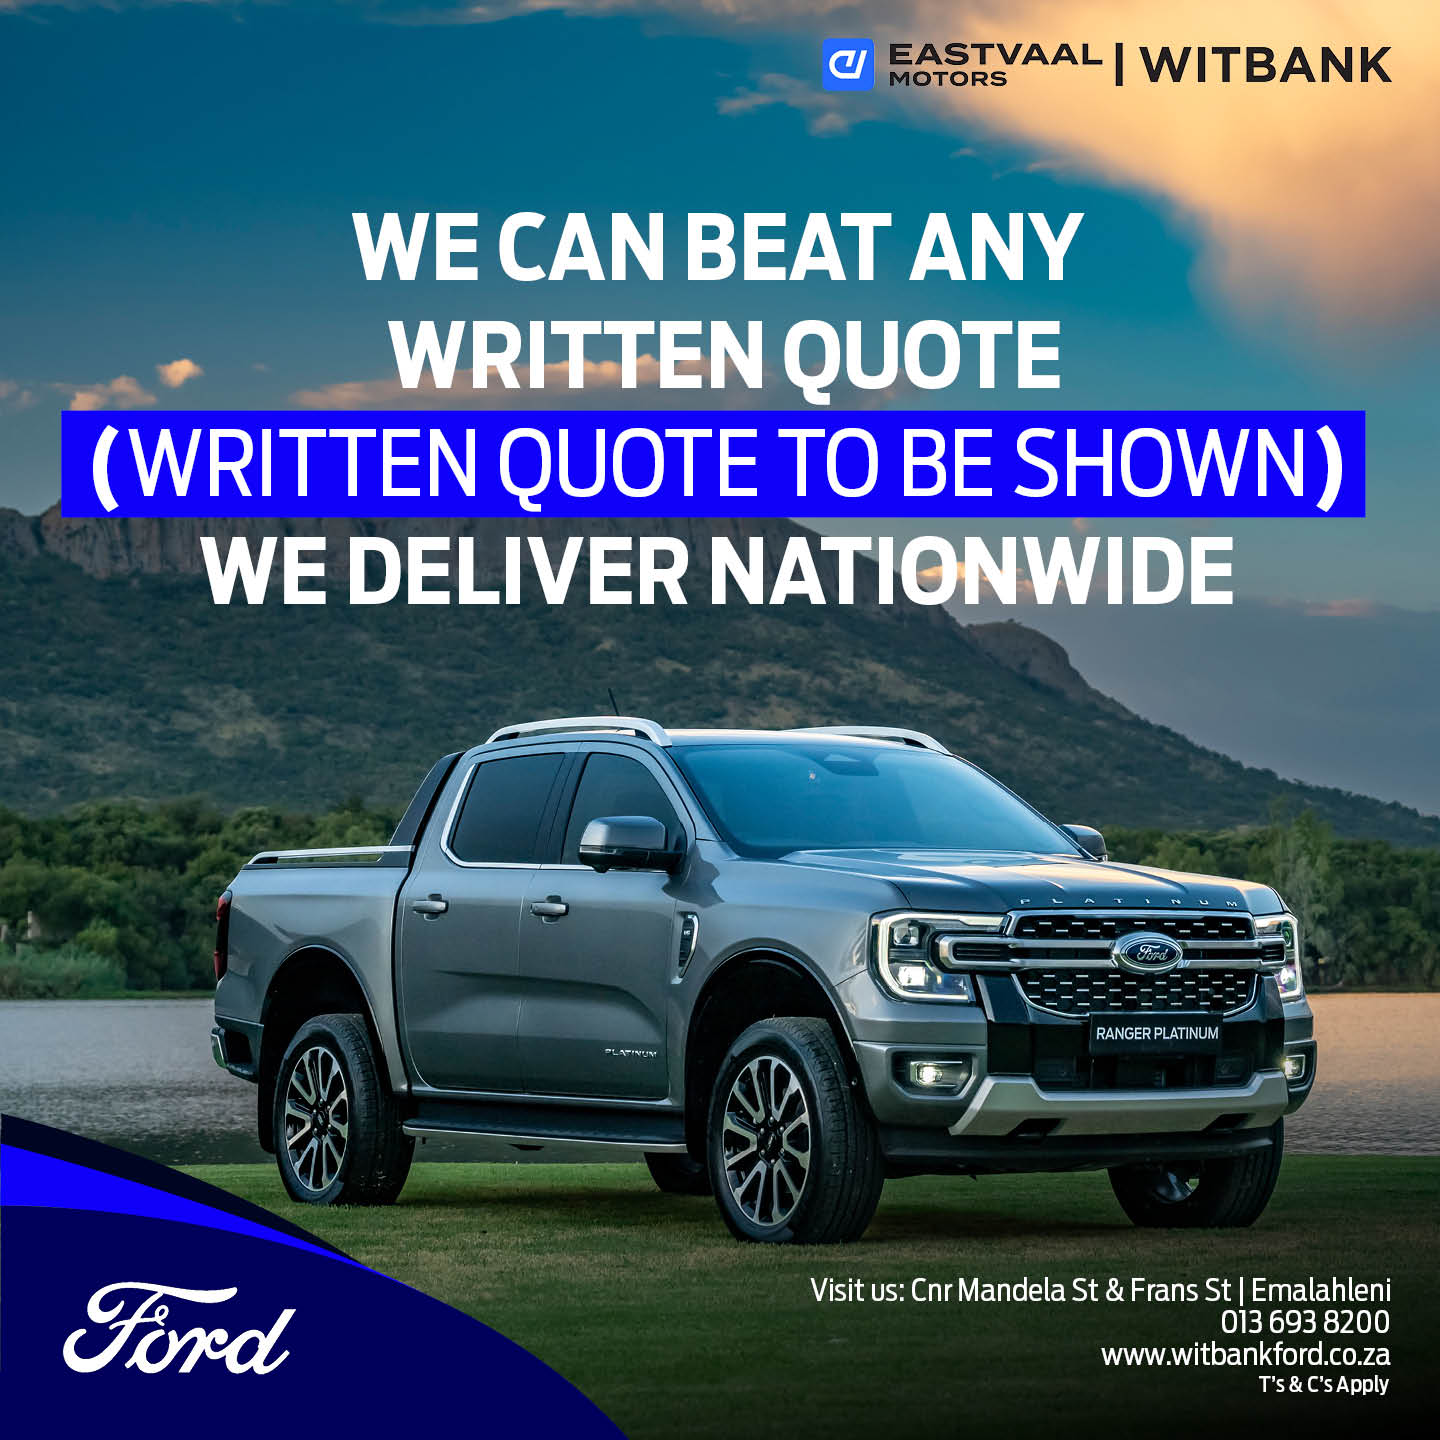 We beat ANY written quote image from 